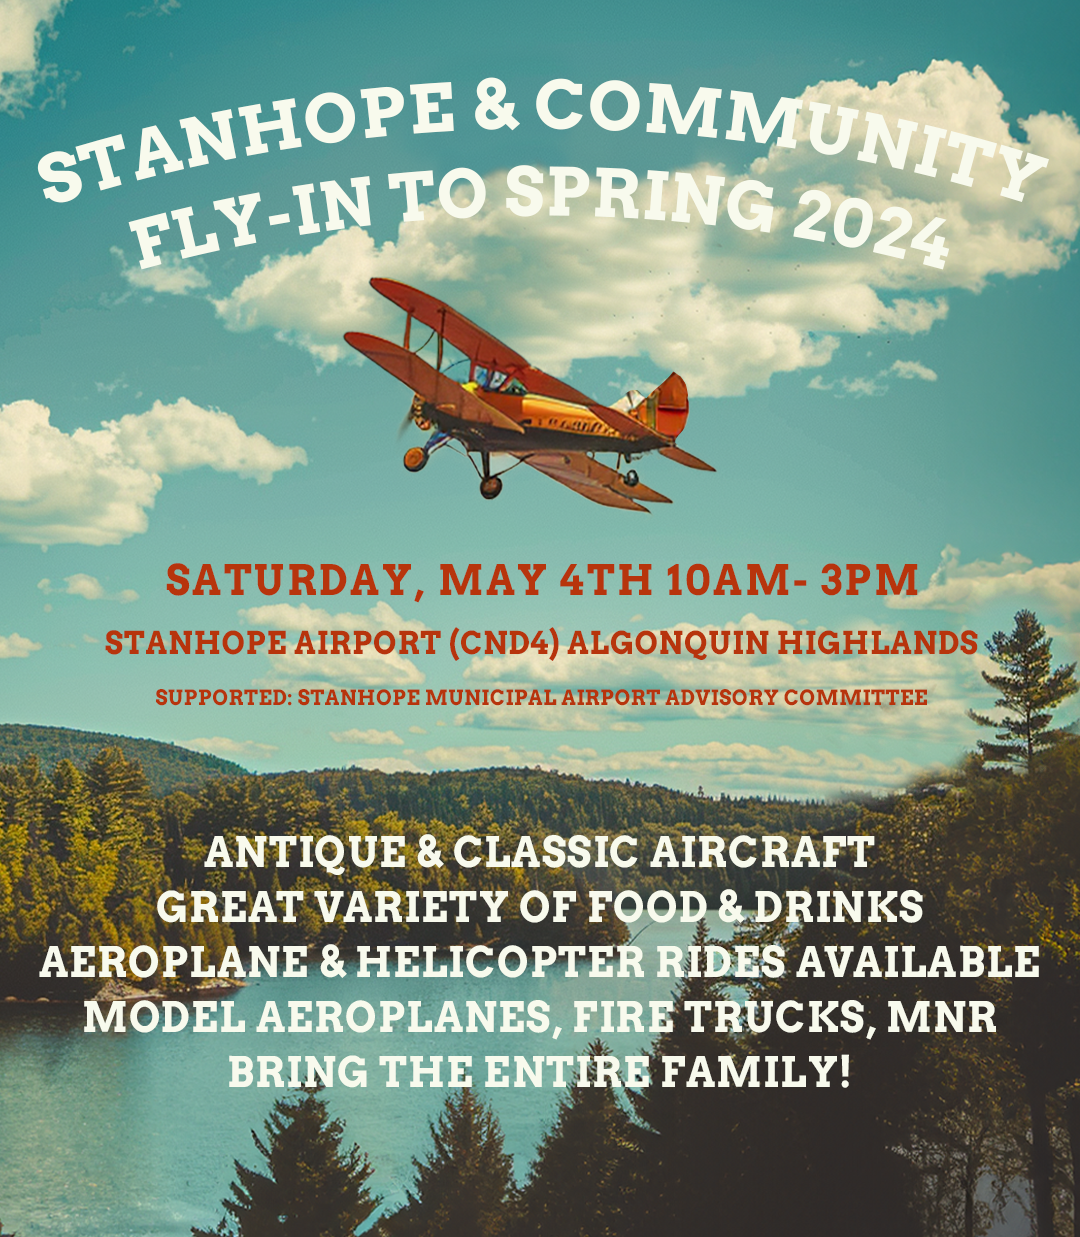 Image shows poster for Stanhope and Community Fly-In to Spring event.